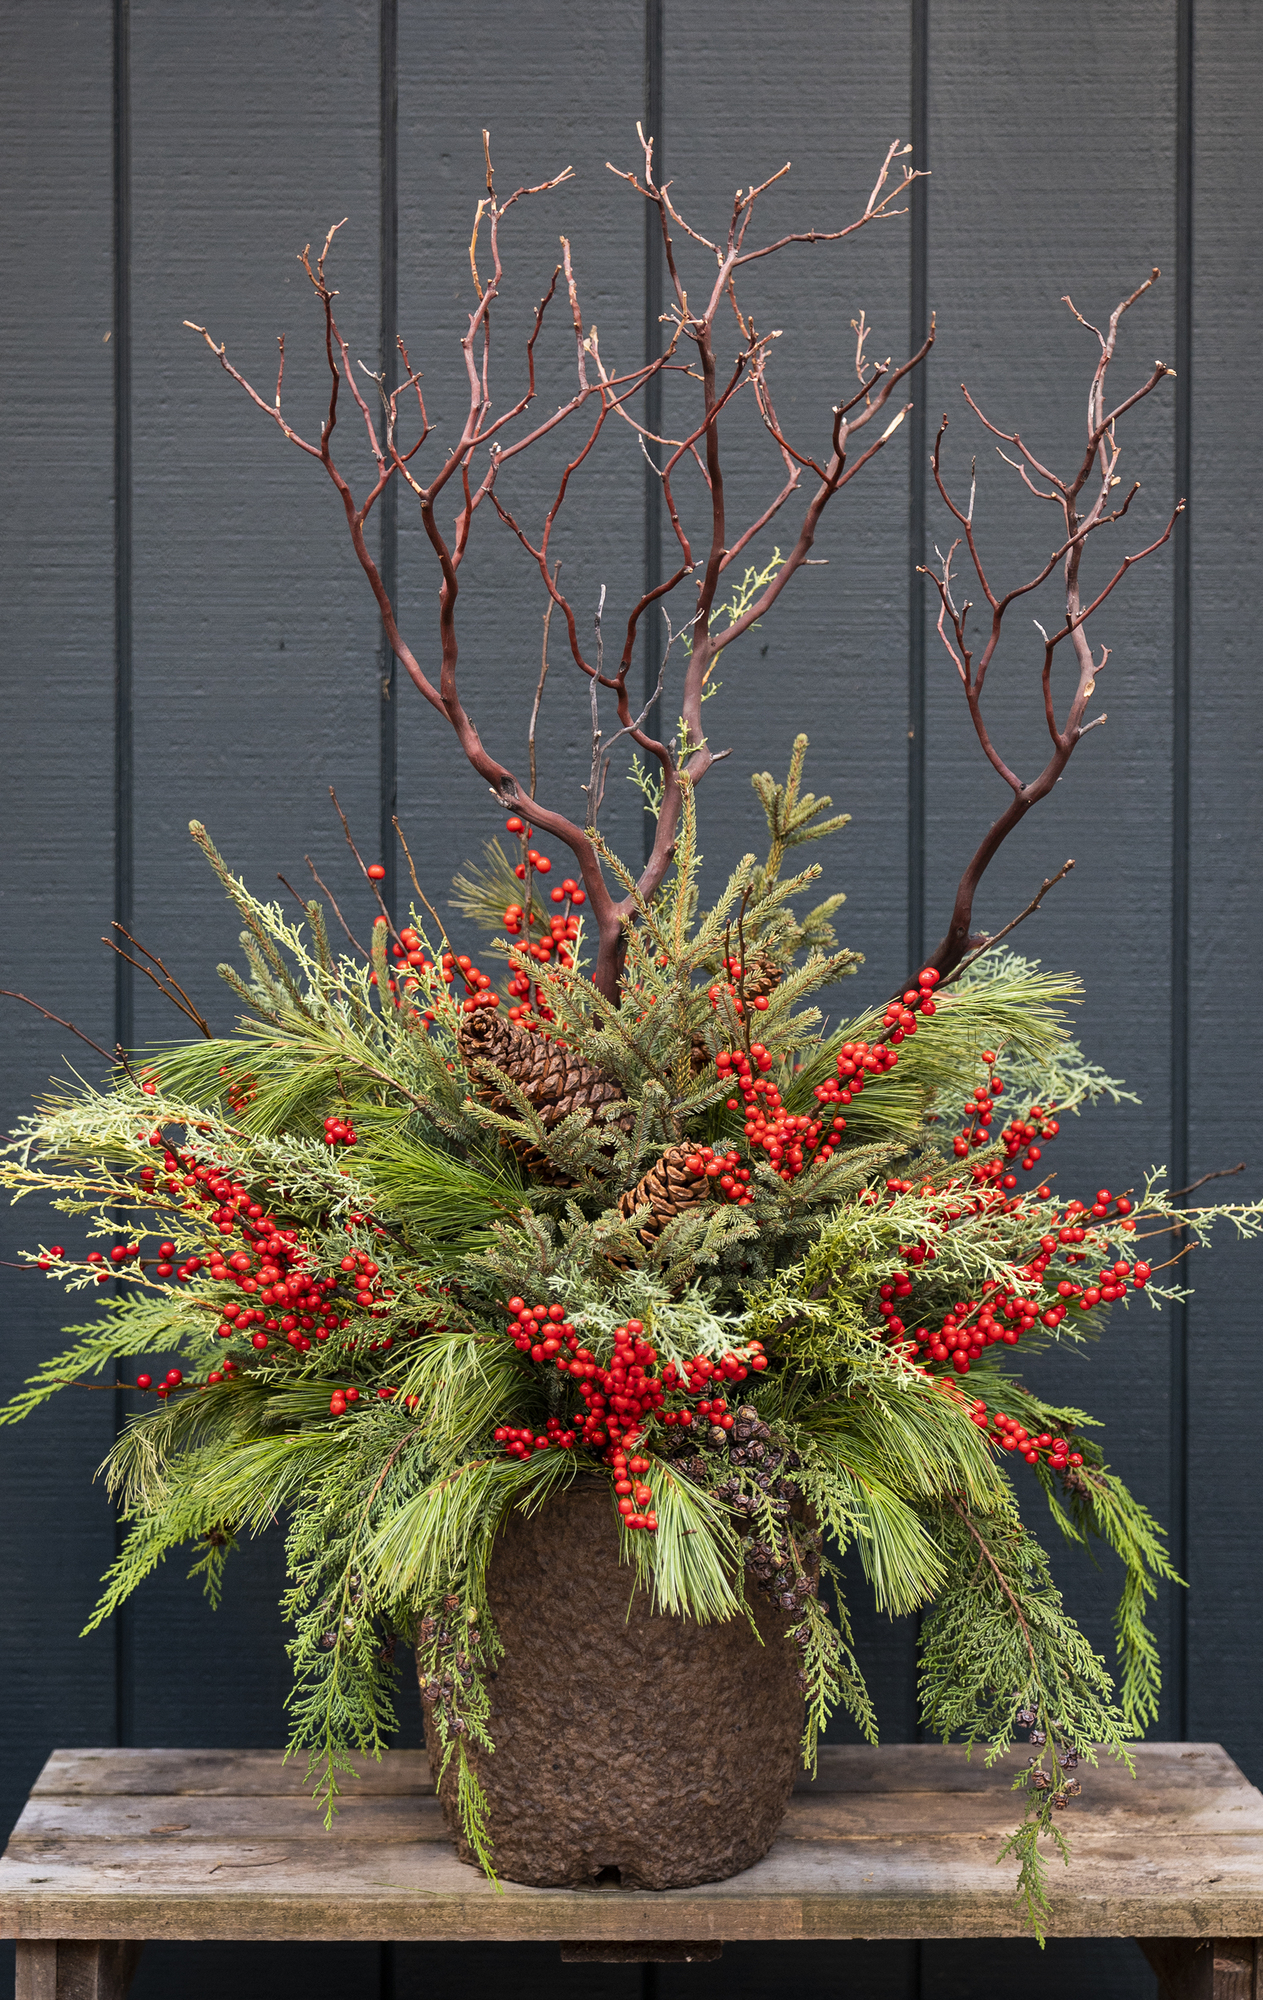 Holiday spruce planter design from Madeline Parks, the assistant manager at Leitner’s Garden Center.